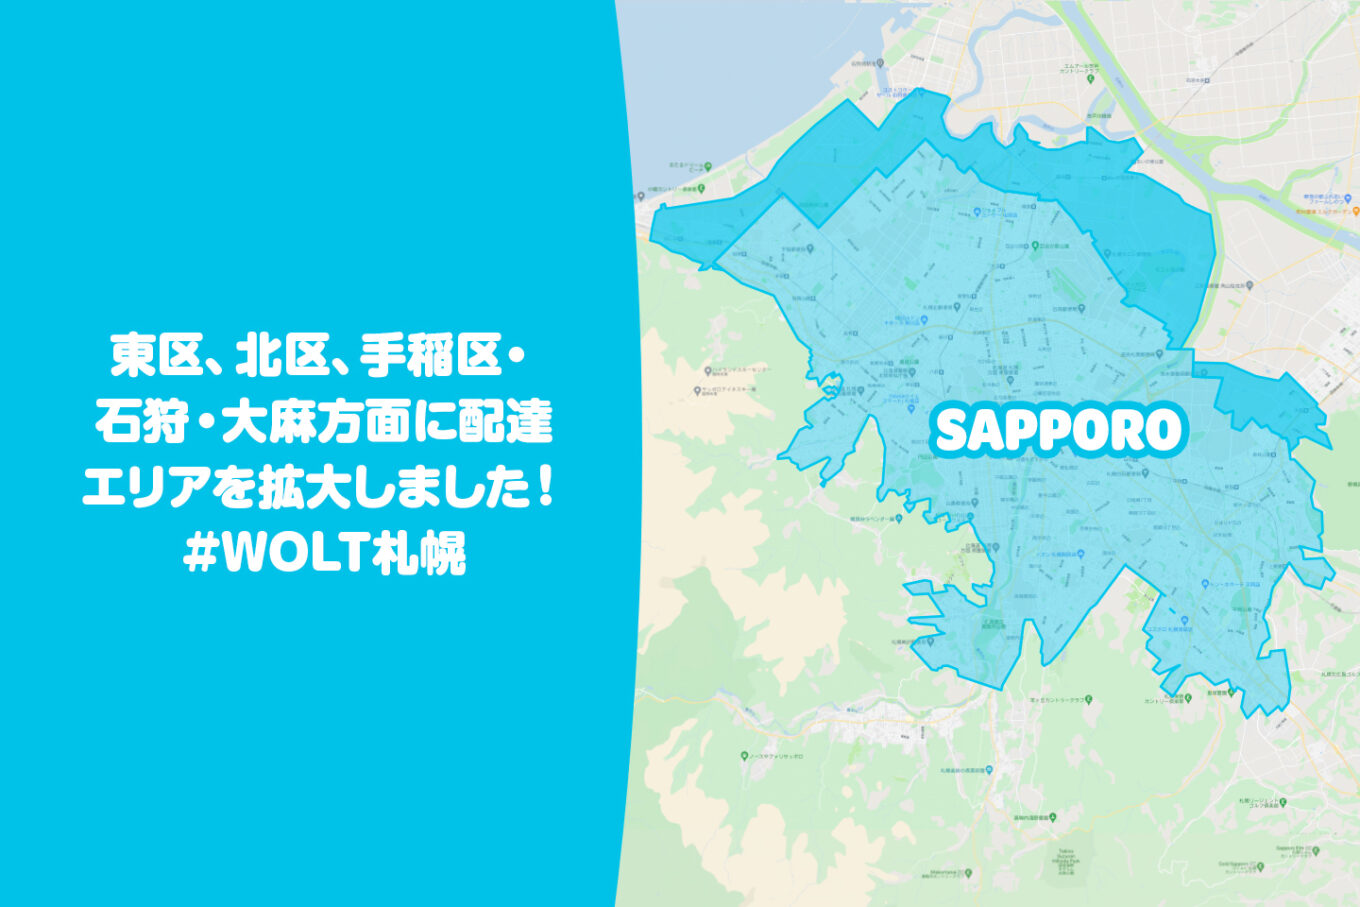 Wolt（ウォルト）札幌エリア・10月28日拡大